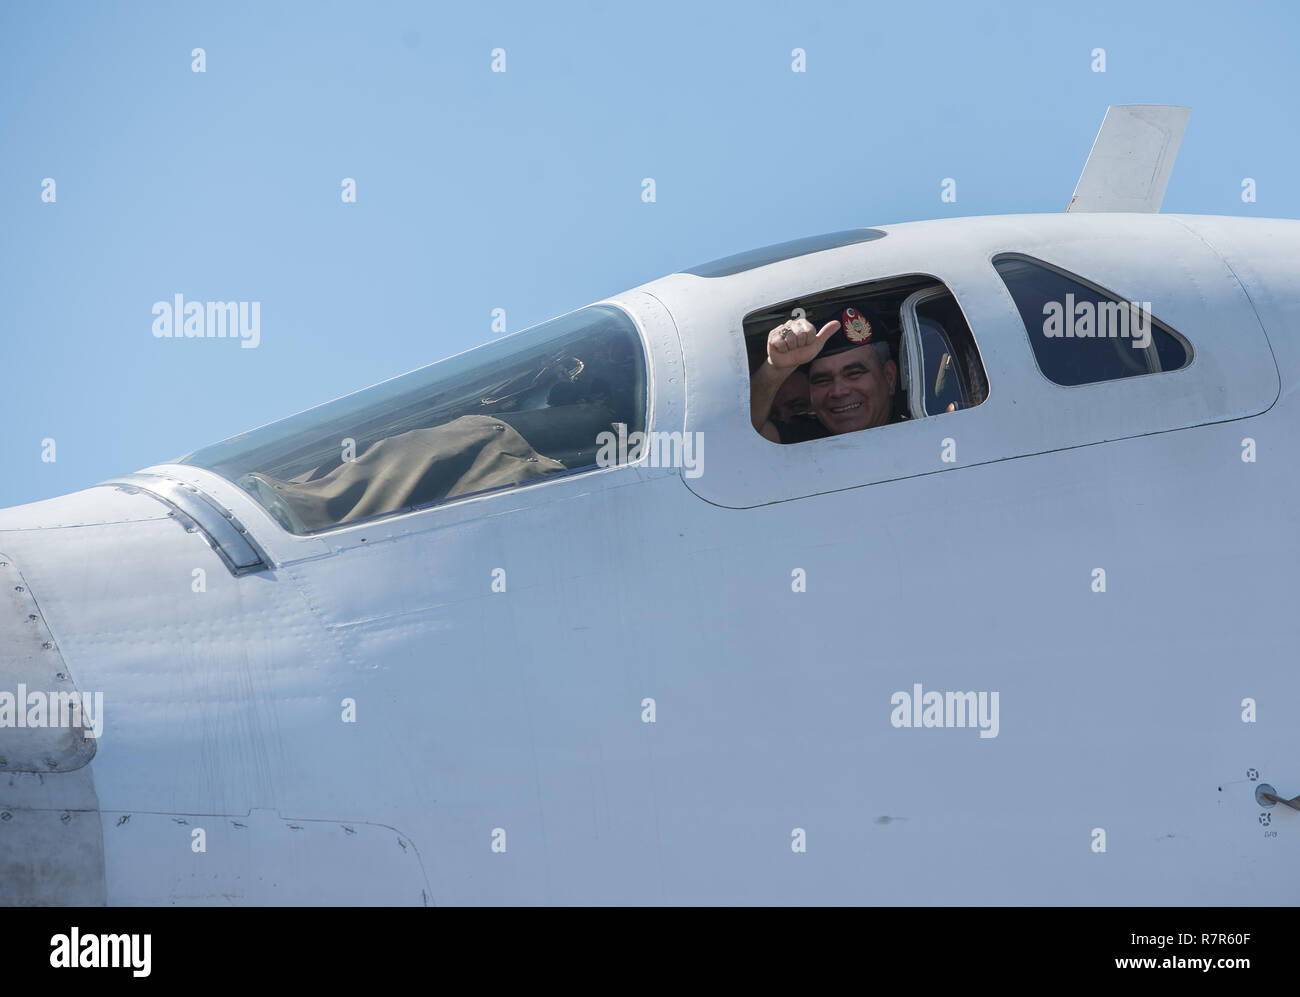 Caracas, Venezuela. 10 Dec 2018. Aircraft of Tupolev 160 of the Russian Air Force arrive at the airport of Maiquetía, north of Caracas, to participate in joint maneuvers with armed forces of Venezuela. Credit: Marcos Salgado/Alamy Live News Stock Photo